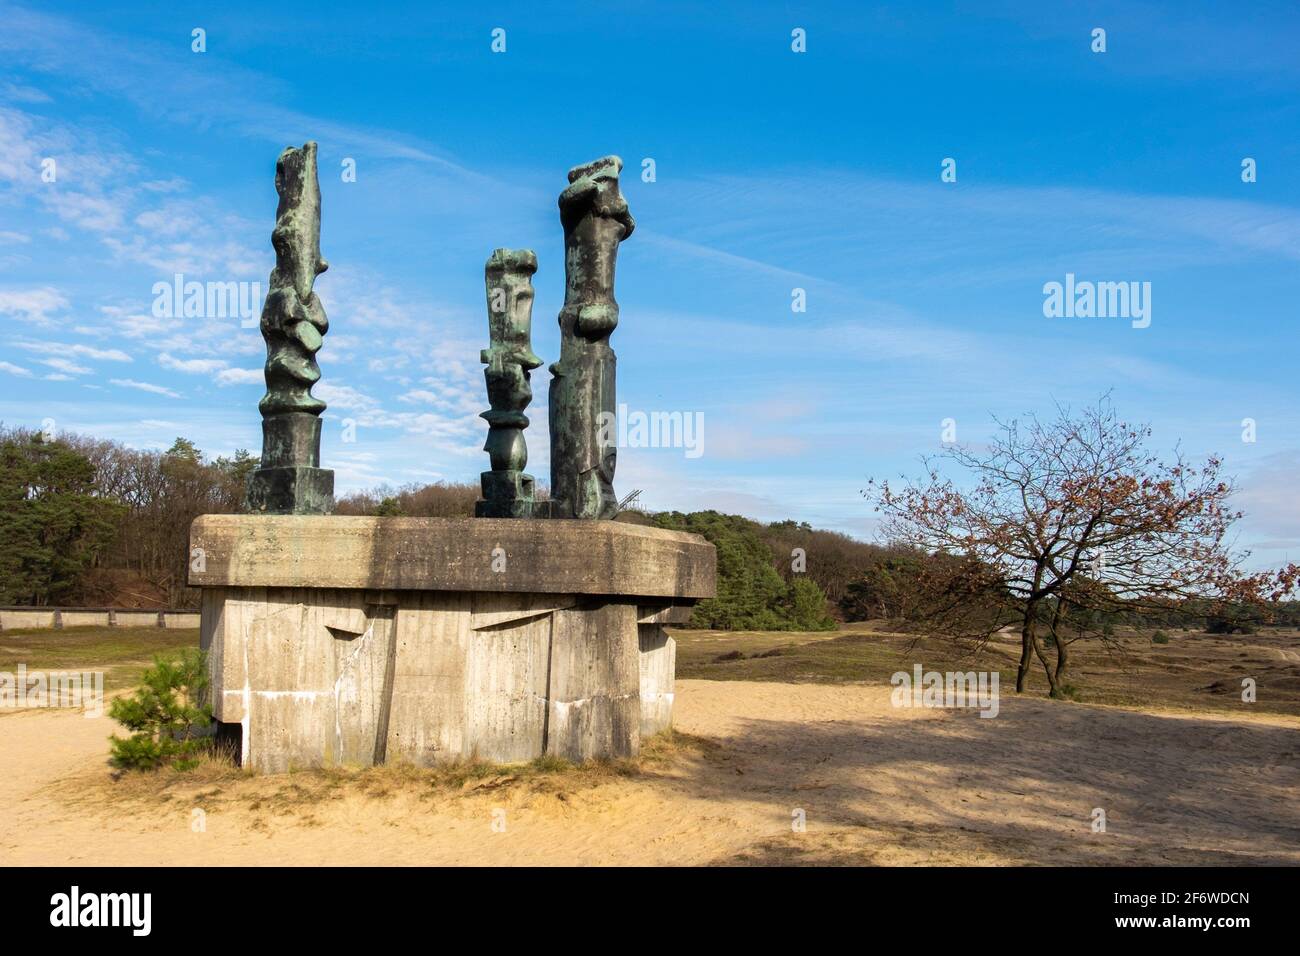 Series of tall standing sculptures: Three upright motives by Henry Moore, Otterlo, The Netherlands, Europe. Stock Photo